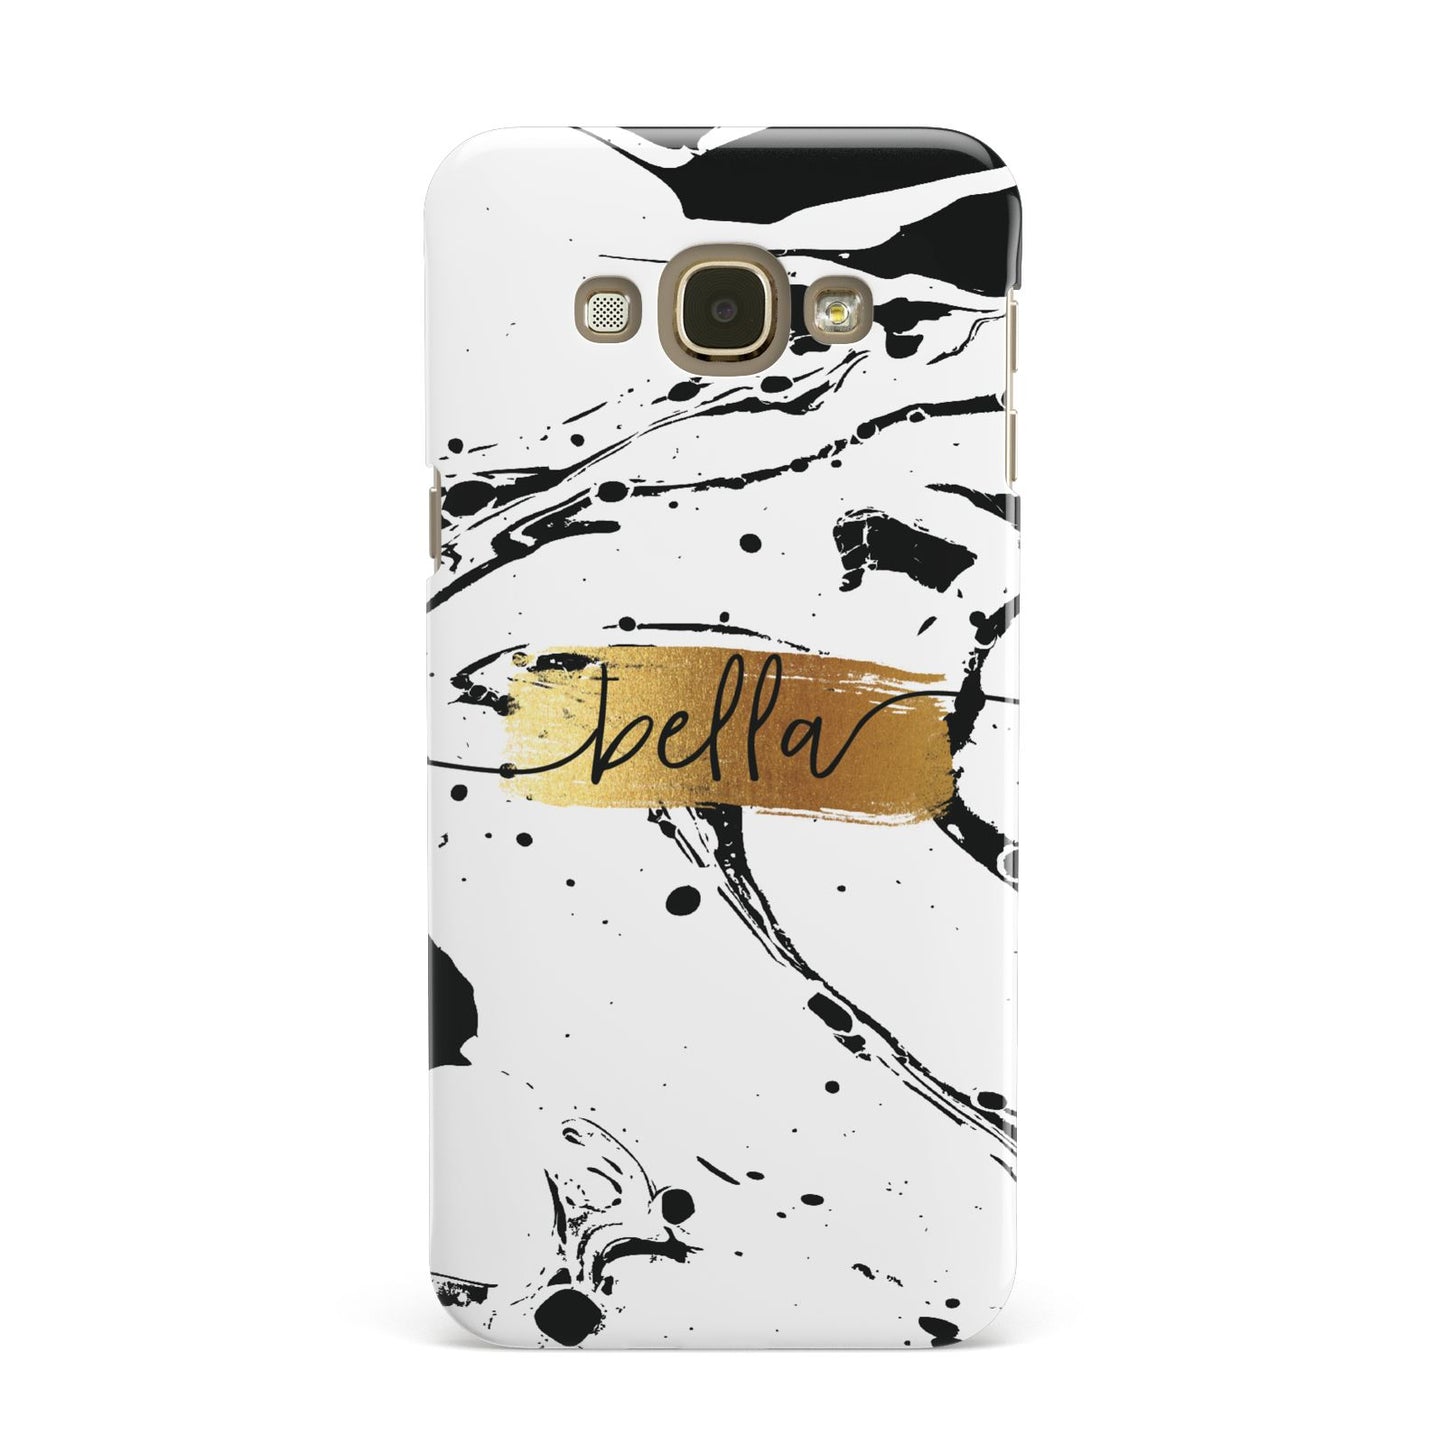 Personalised White Gold Swirl Marble Samsung Galaxy A8 Case